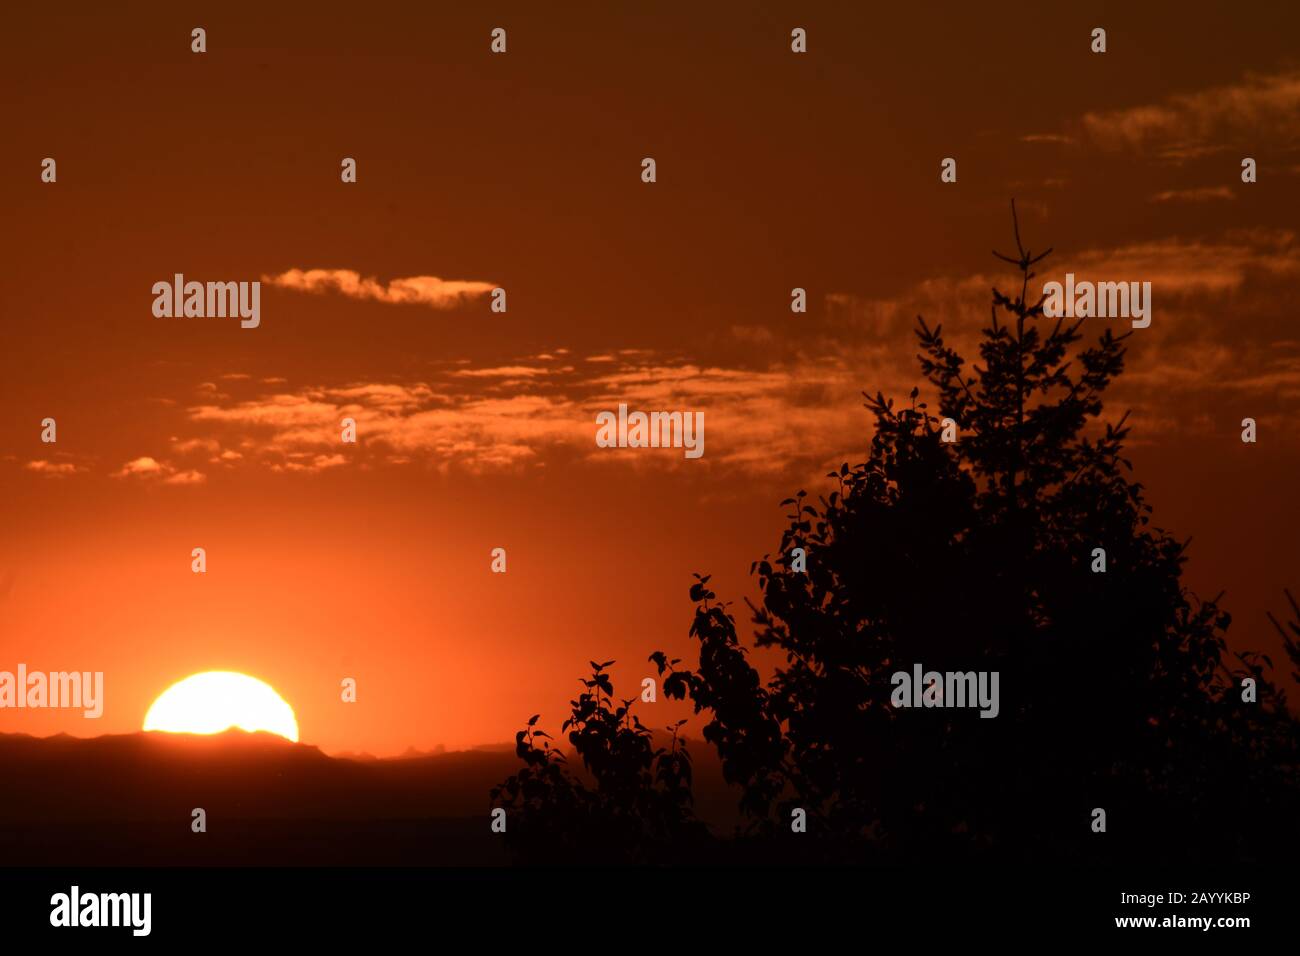 Bright Sun Rising Over Dramatically Silhouetted Mountain Ridge Against Orange Cloudy Sky Stock Photo